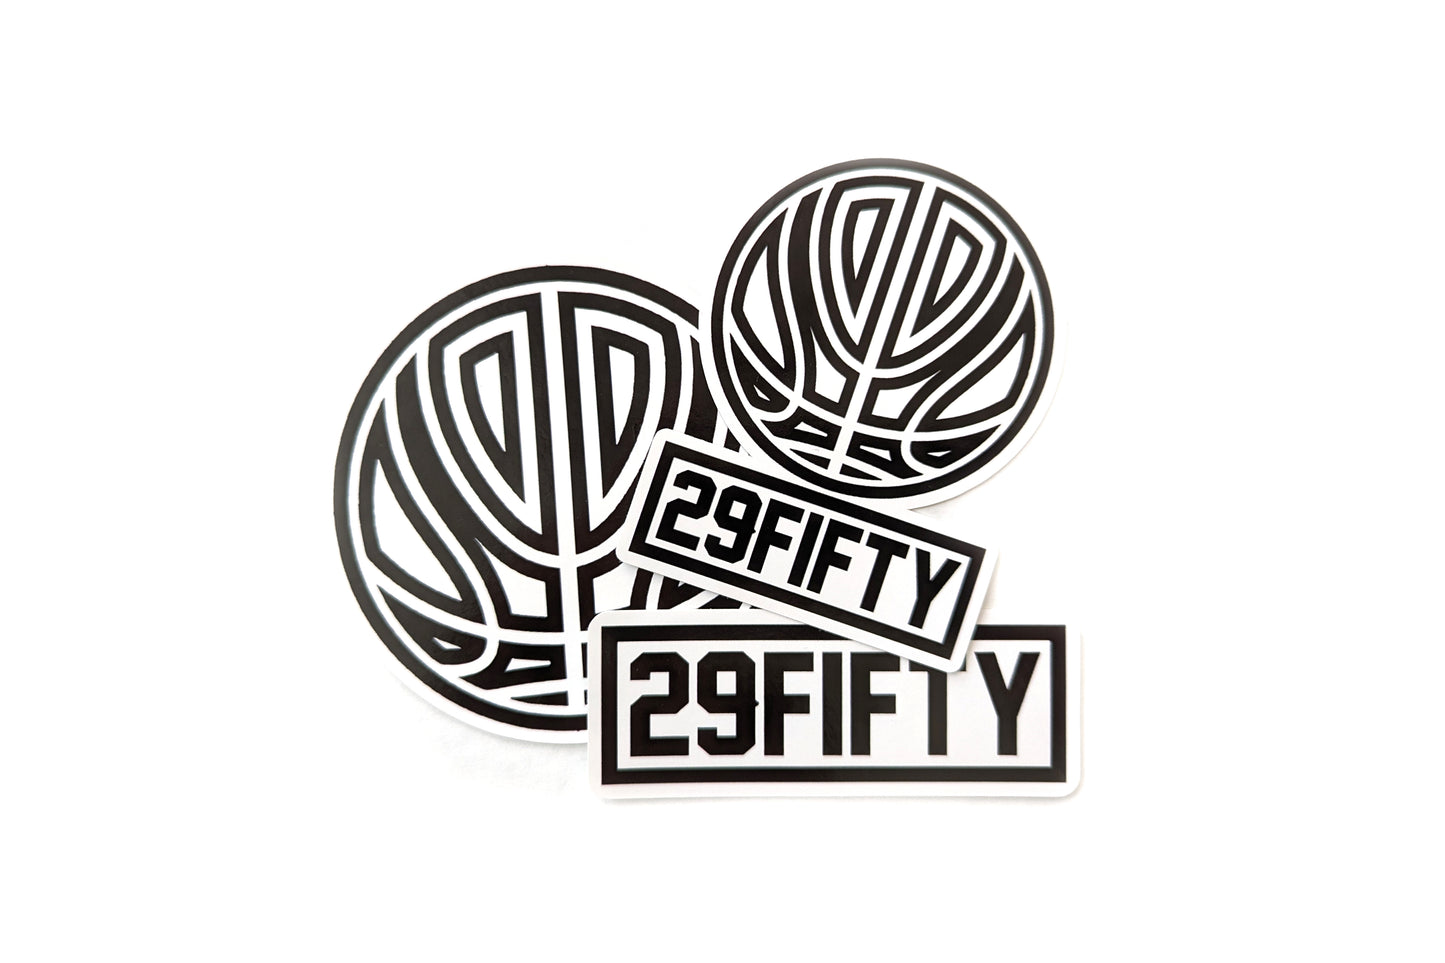 29Fifty Sticker Pack